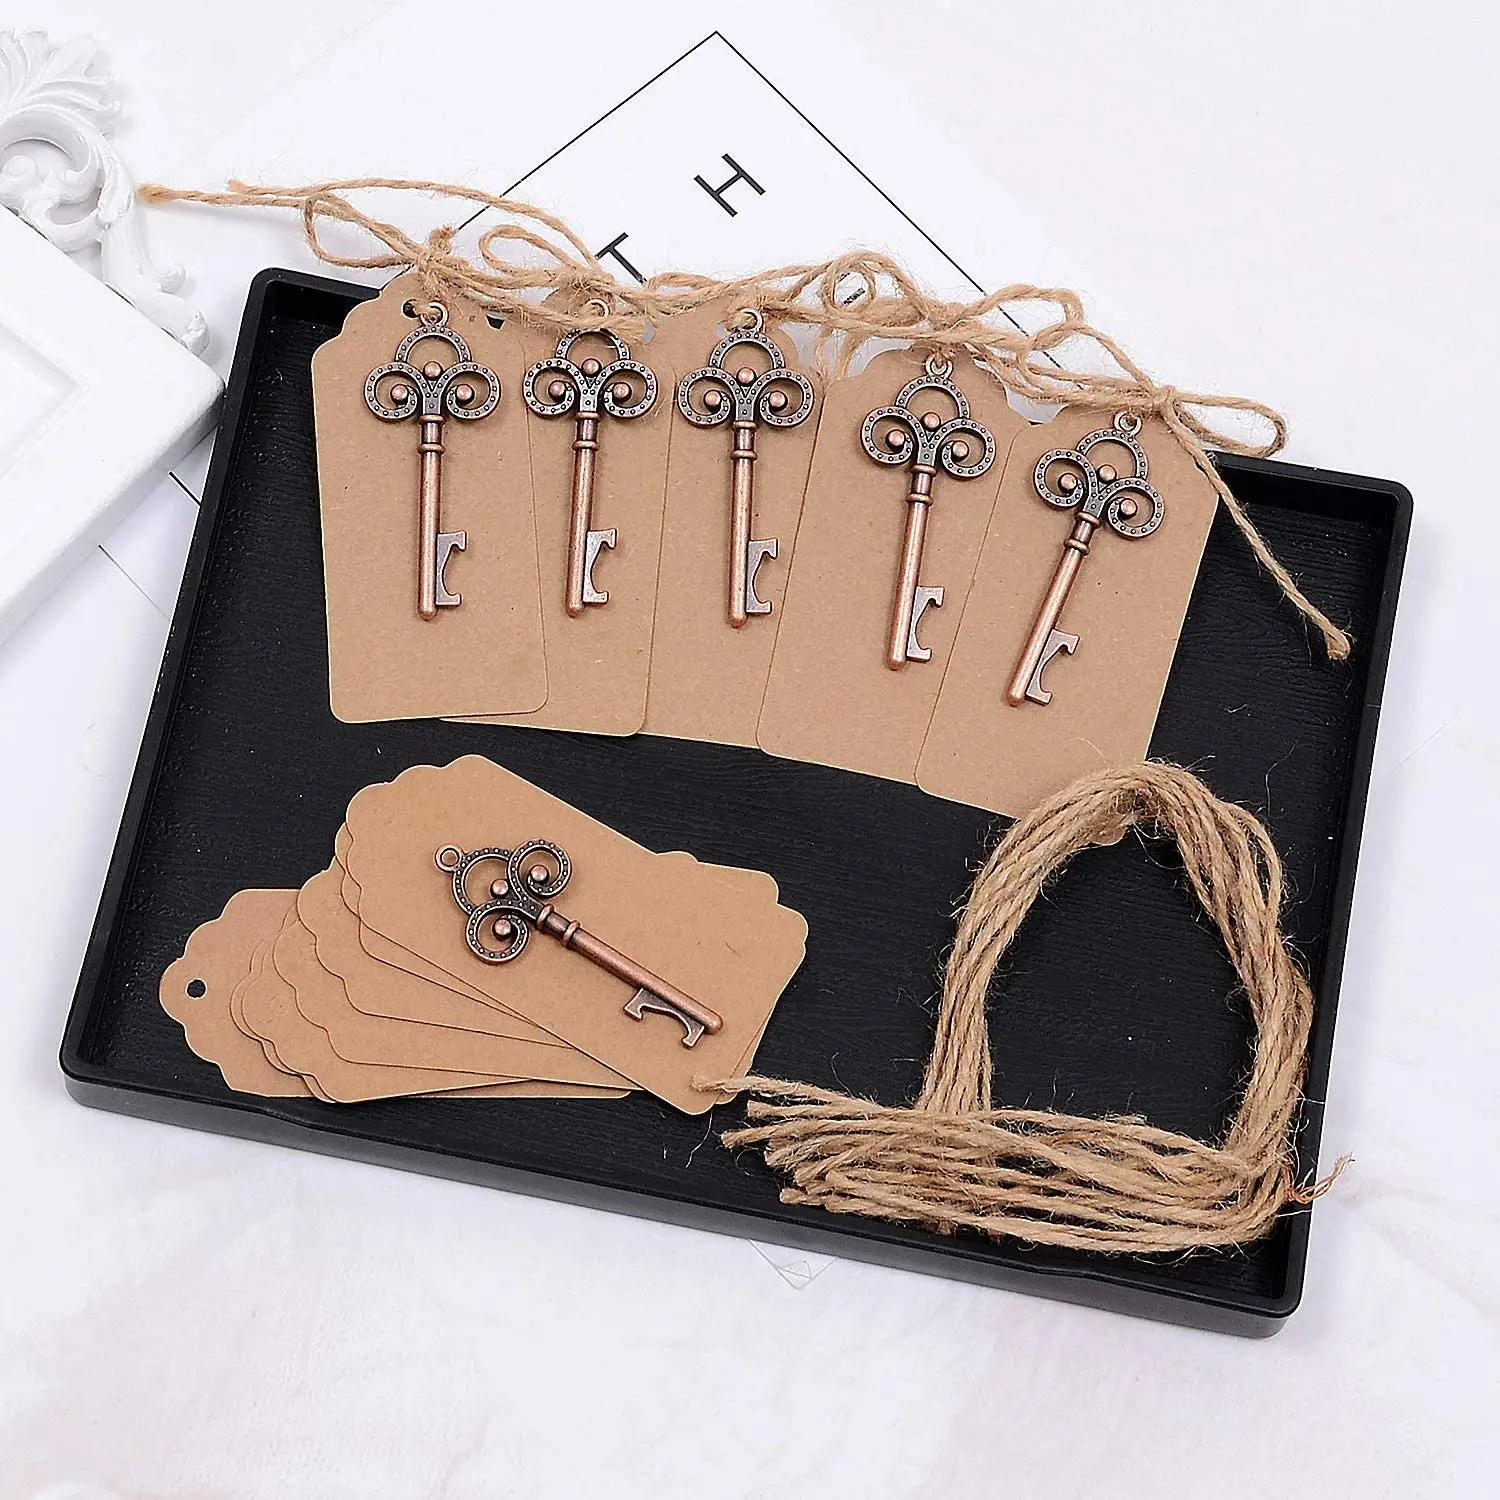 

50PCS Beer Bottle Opener Key Antique Vintage Copper with Paperboard Tags Cards Twine for Wedding Party Decoration Gifts Home